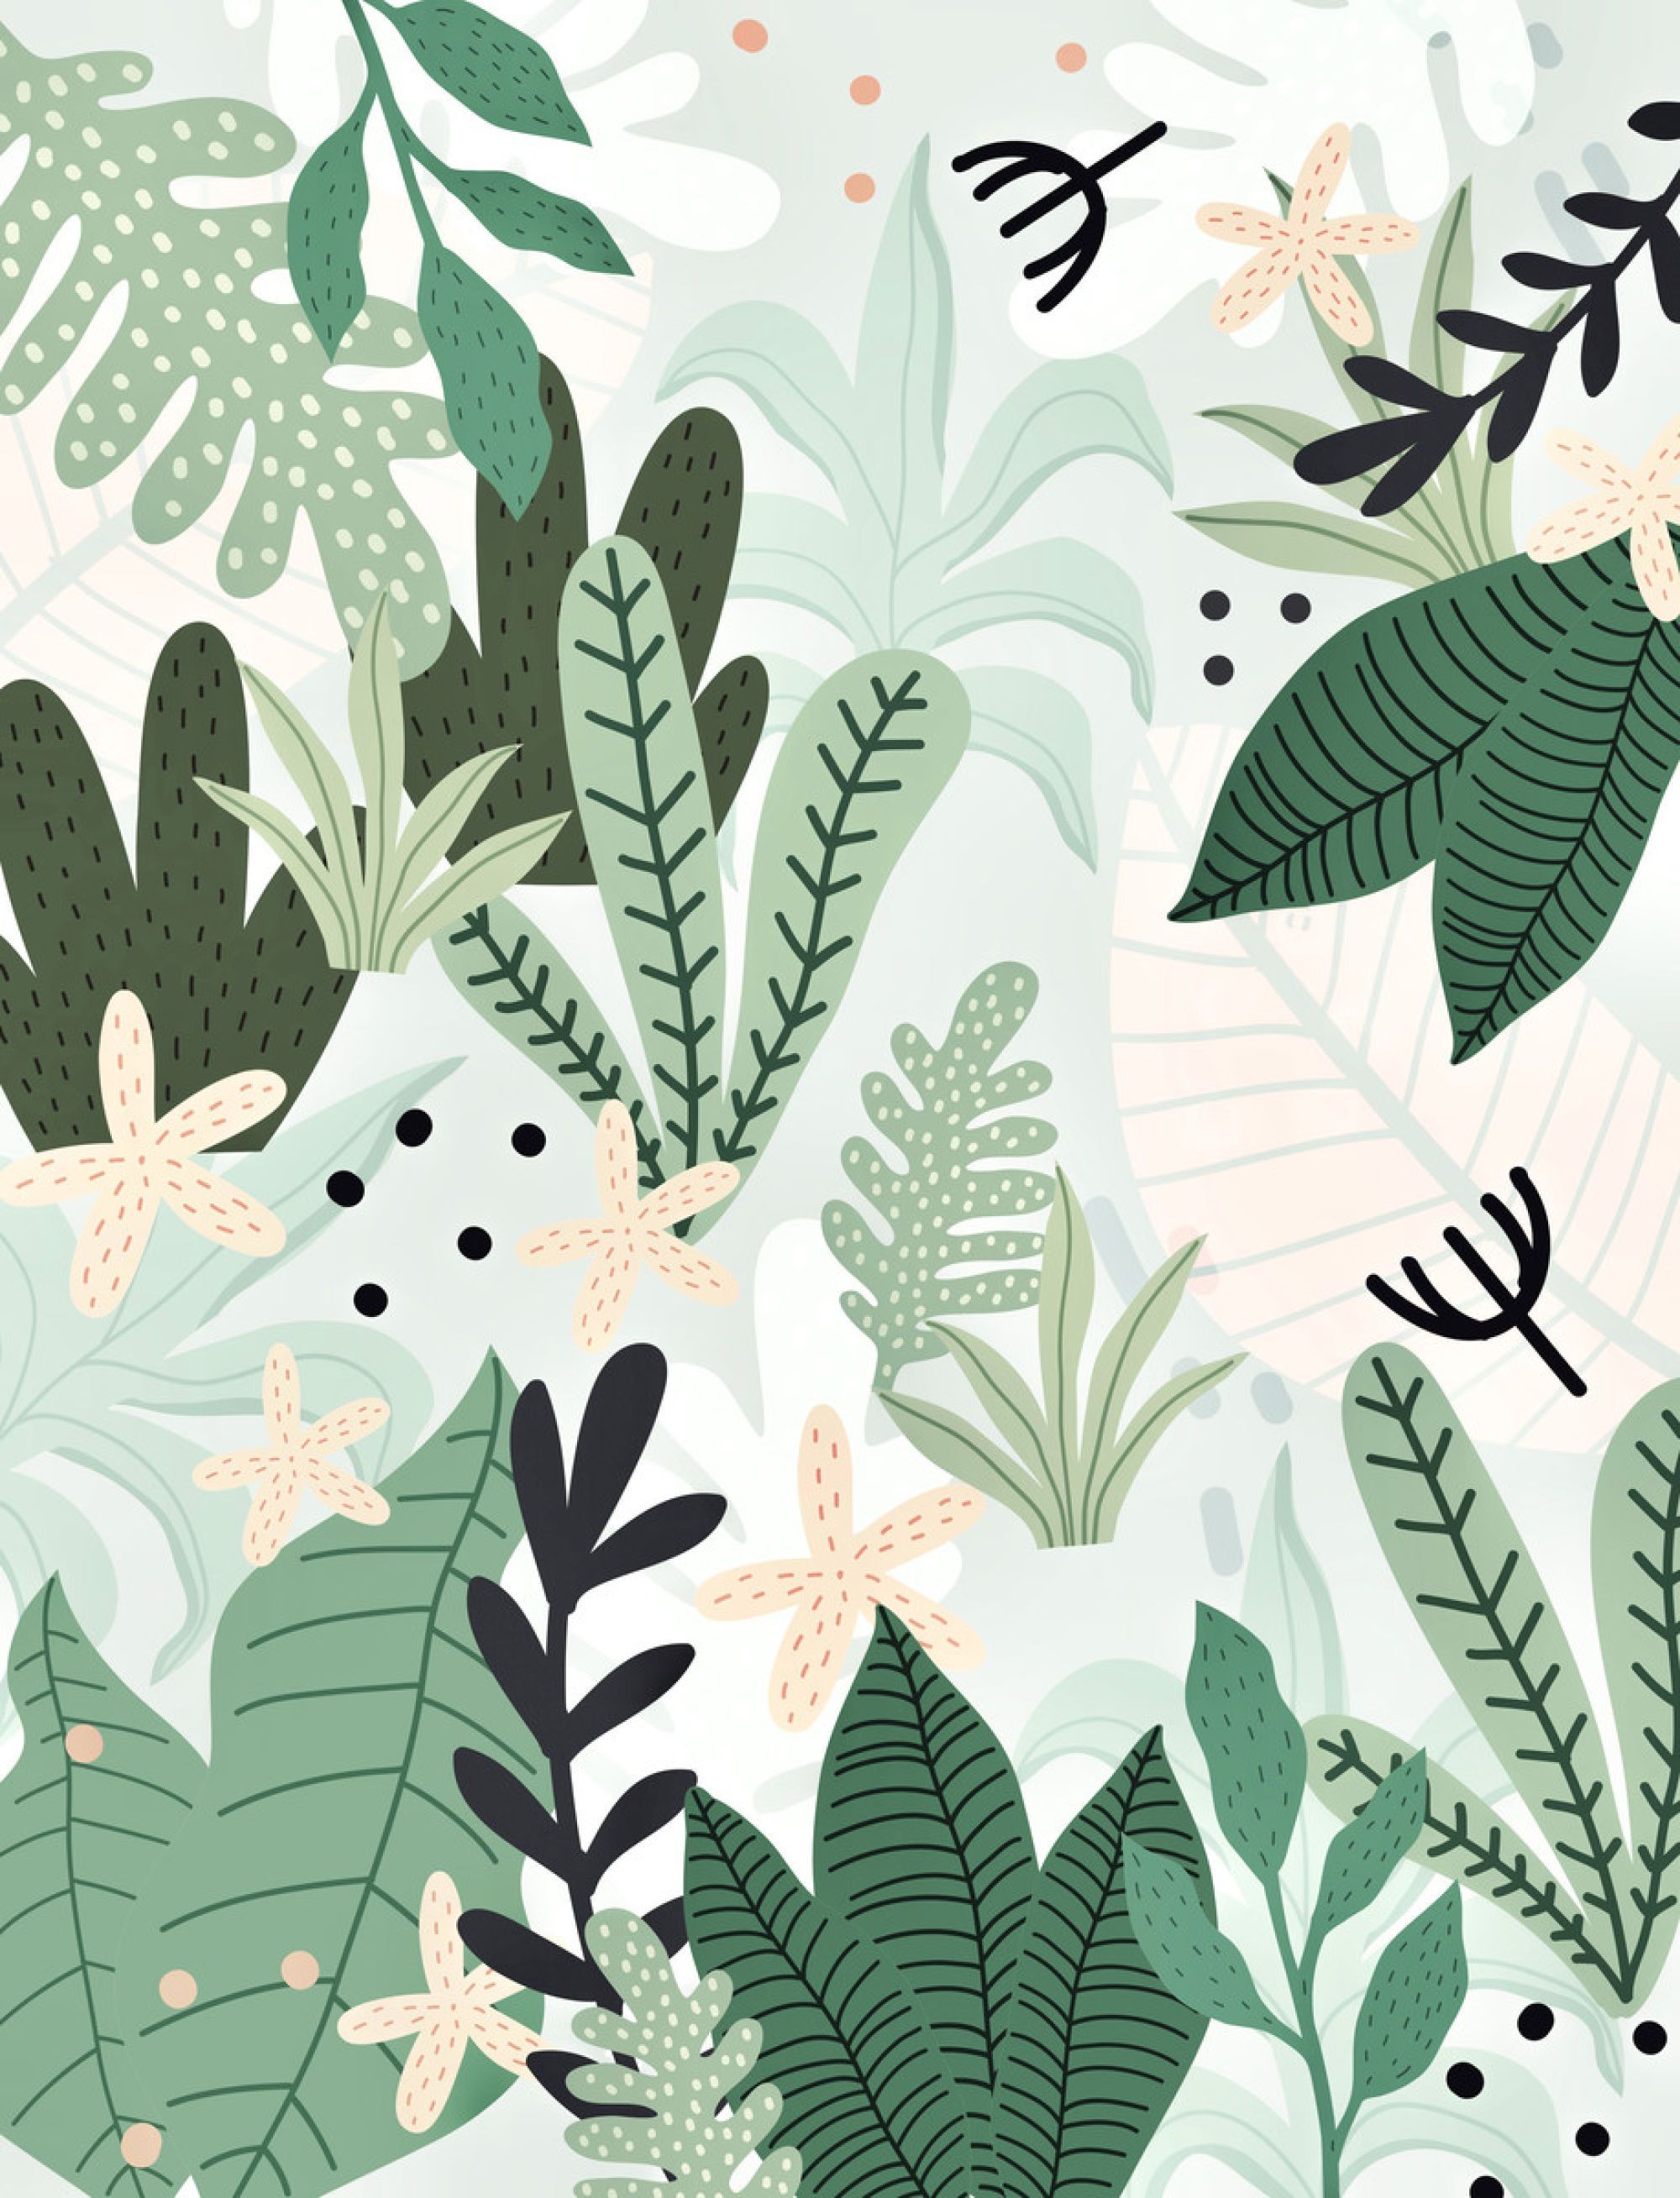 Into the Jungle II Wallpaper by Gale Switzer (galeswitzer) from ?40.00 per m? -   12 plants Pattern inspiration ideas